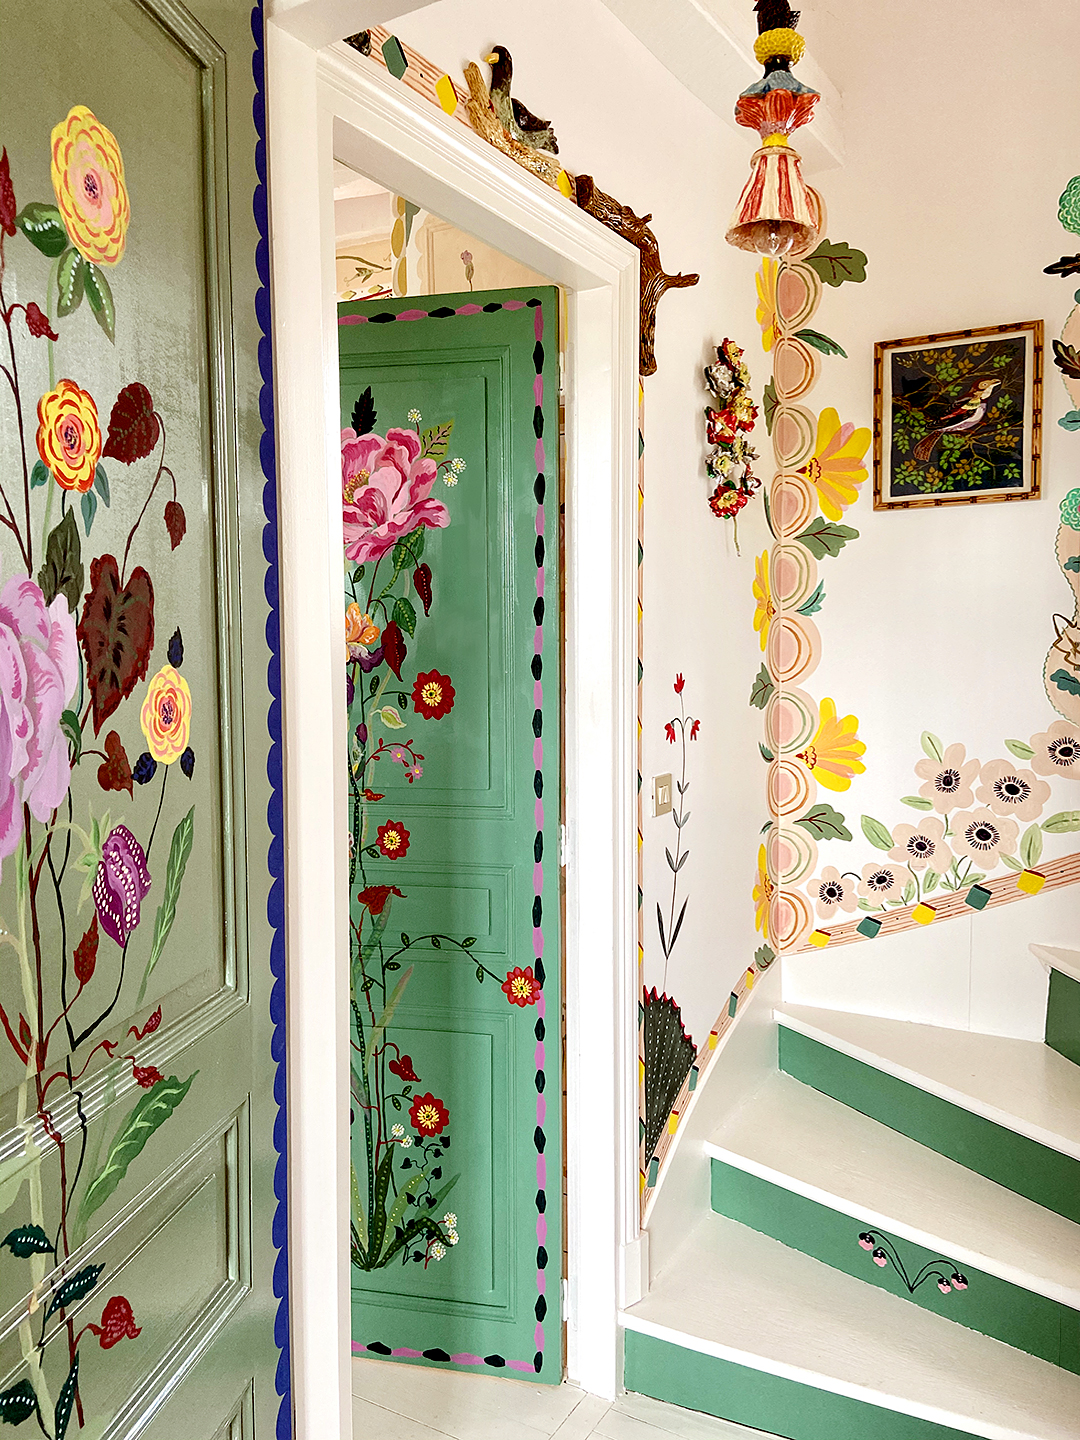 French Artist Nathalie Lete Is Painting Her Home Full of Flowers